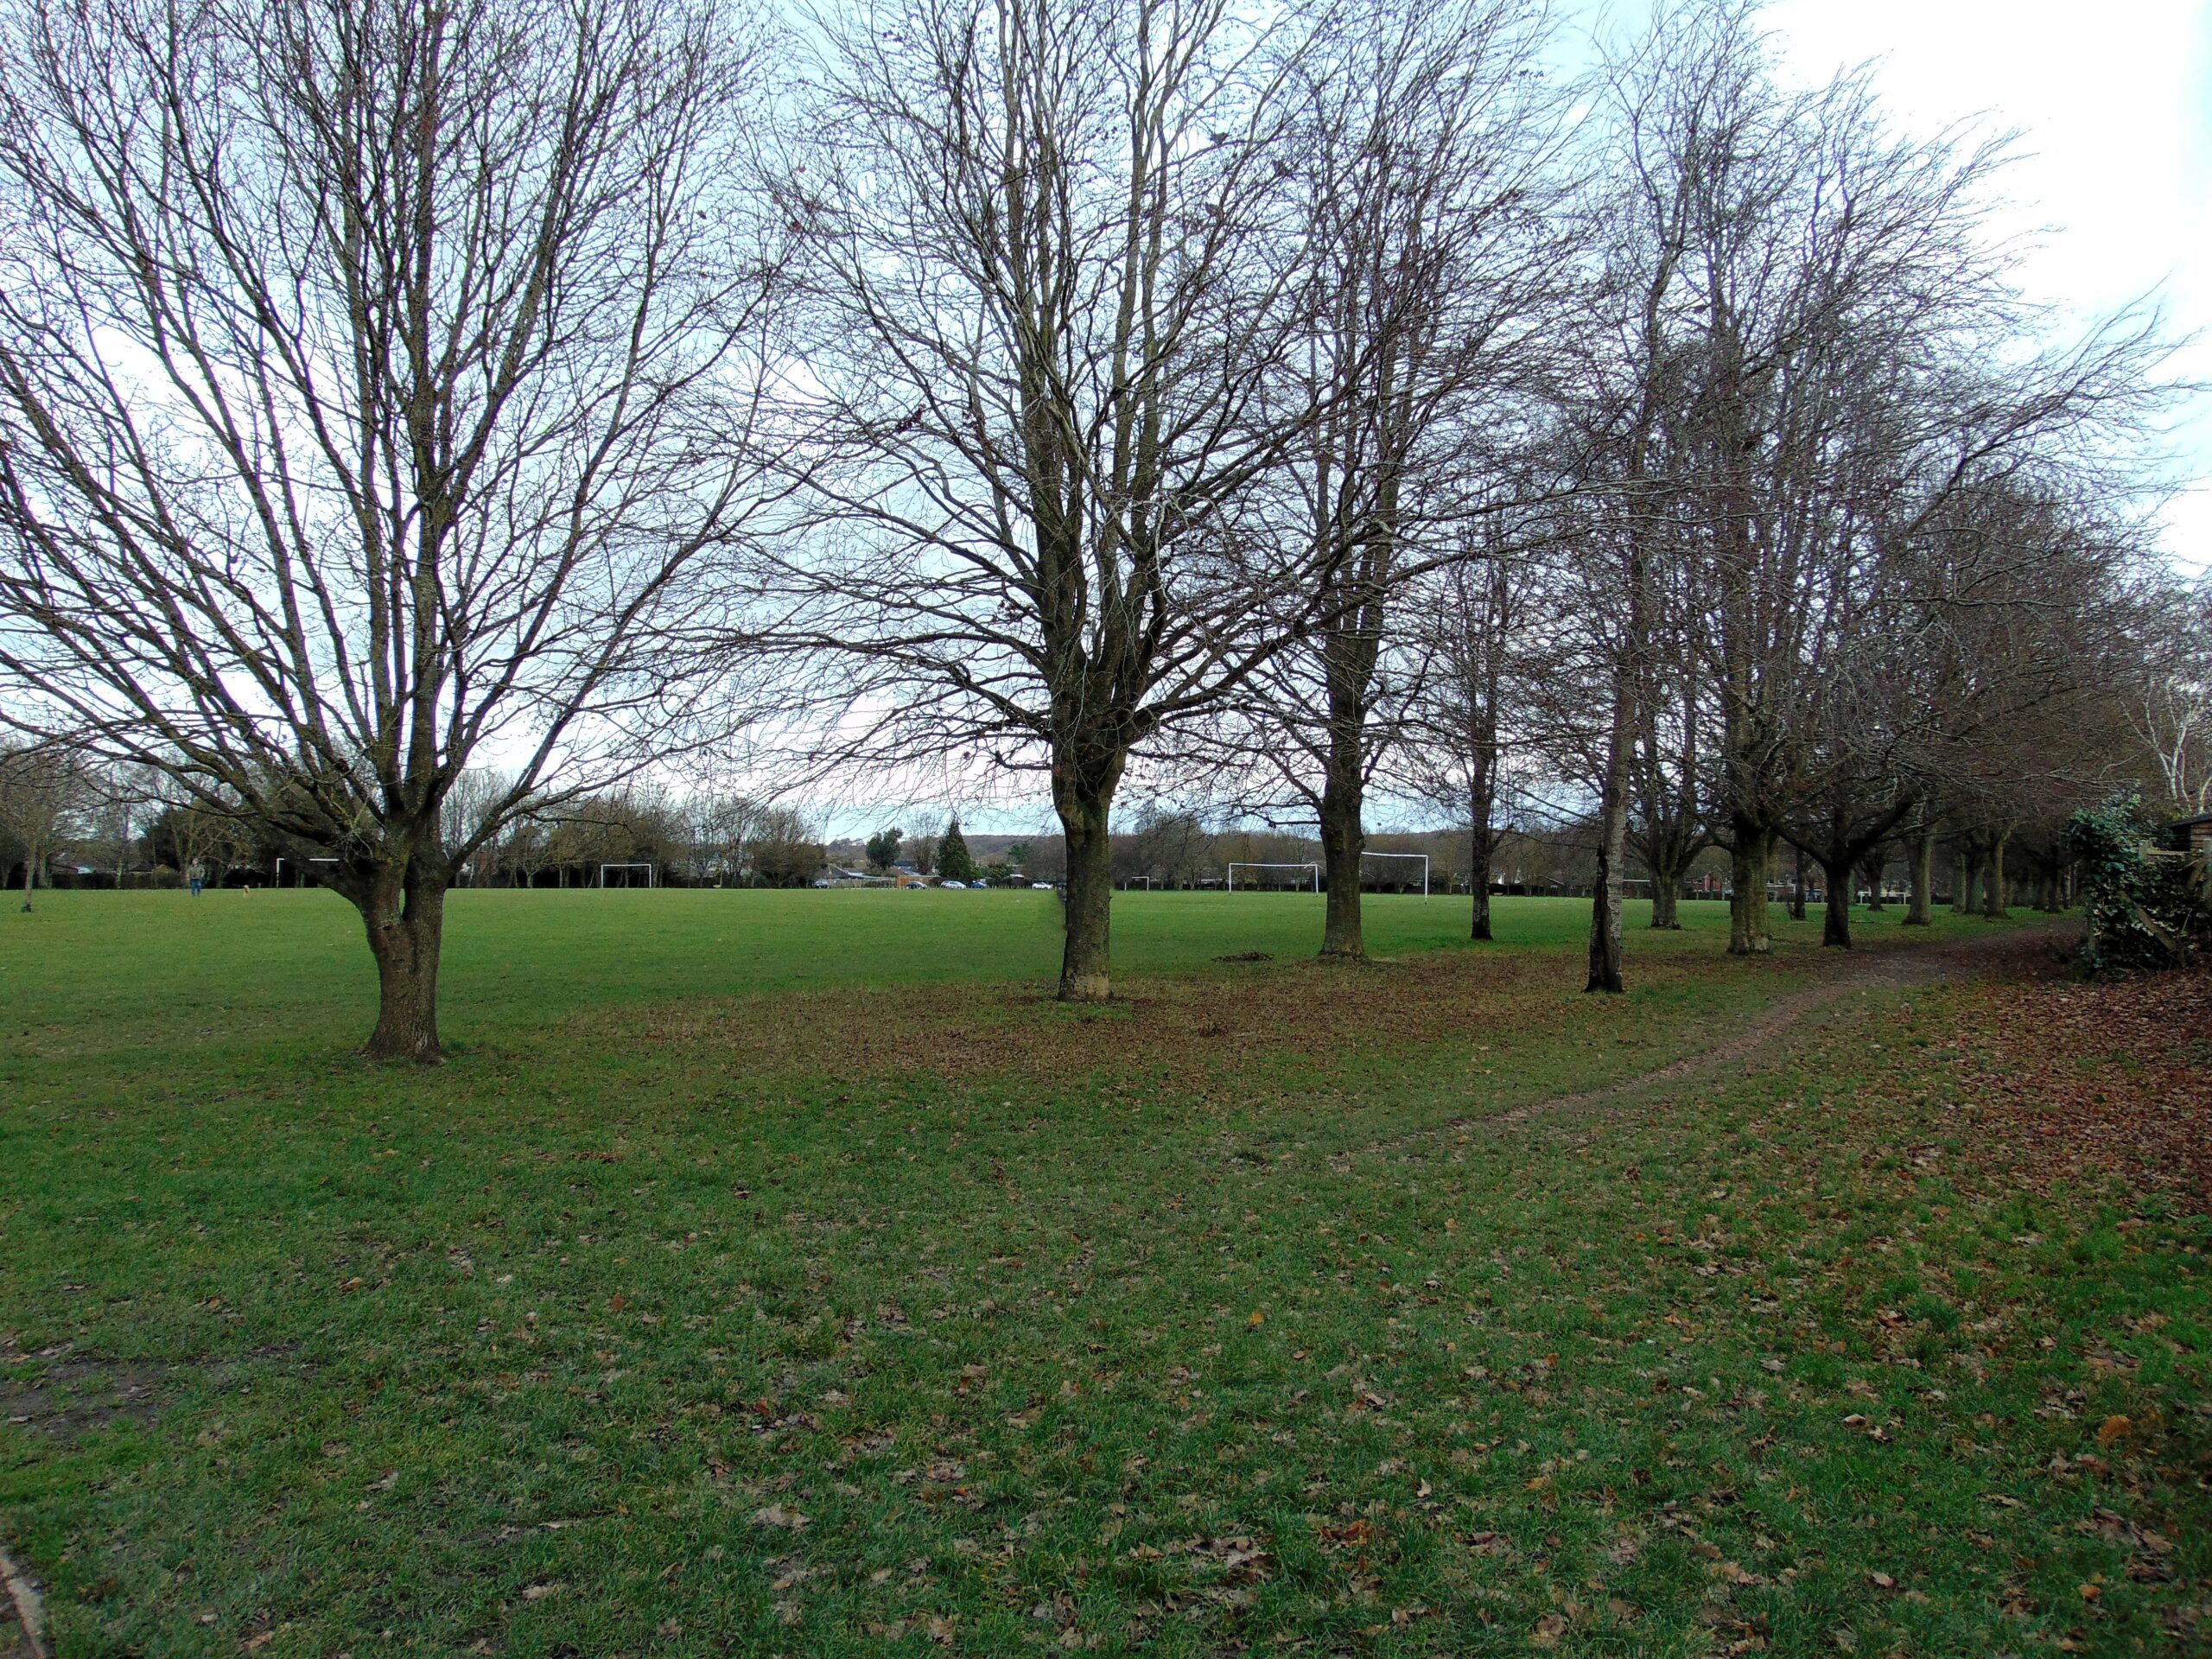 Kingsfrith Playing Fields, Looking across to the North